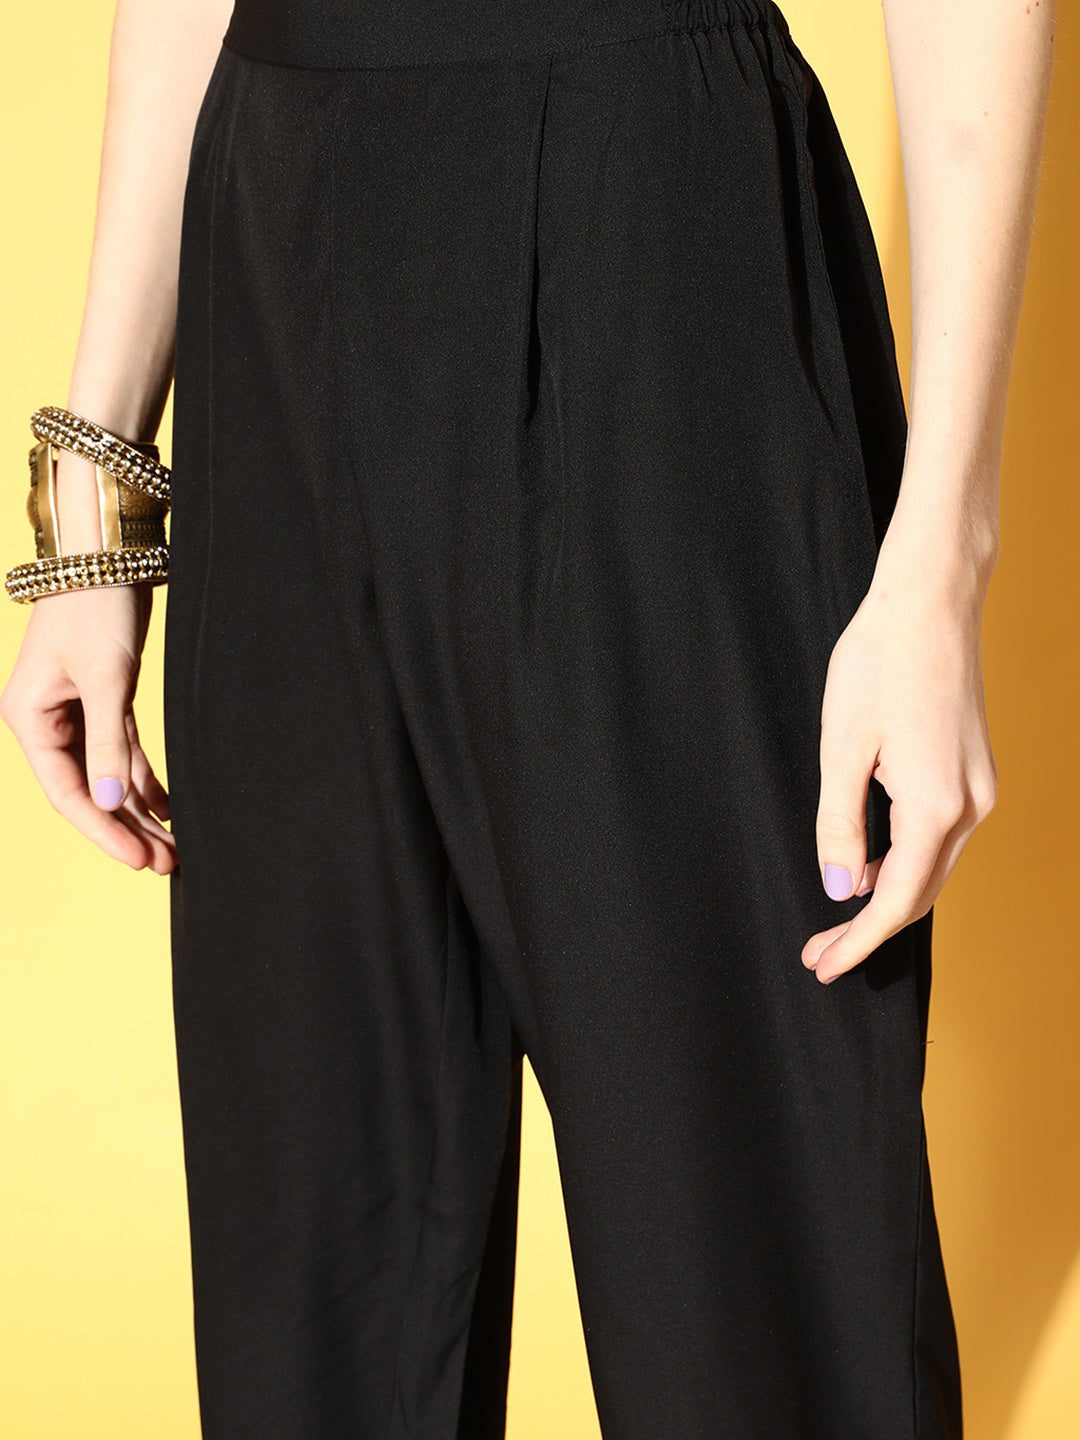 Black & Golden Printed Kurta with Trousers